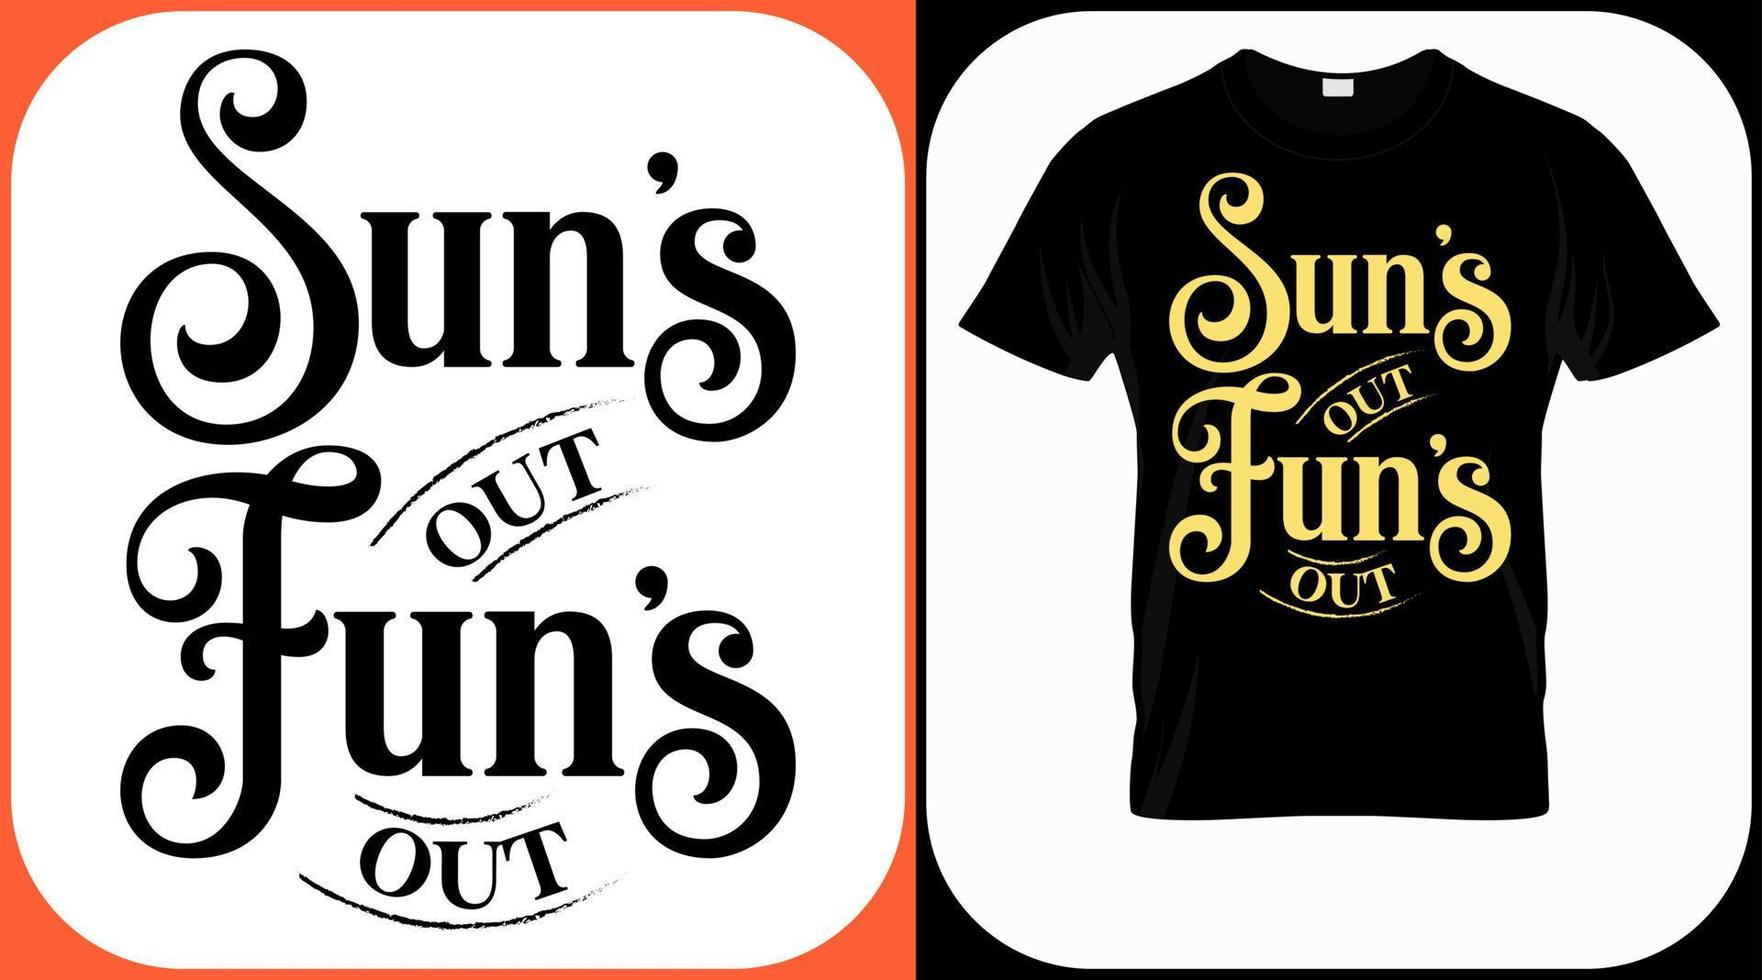 Sun's out fun's out. Family reunion text design. Vintage lettering for social get togethers with the family and relatives. Reunion celebration template sign vector